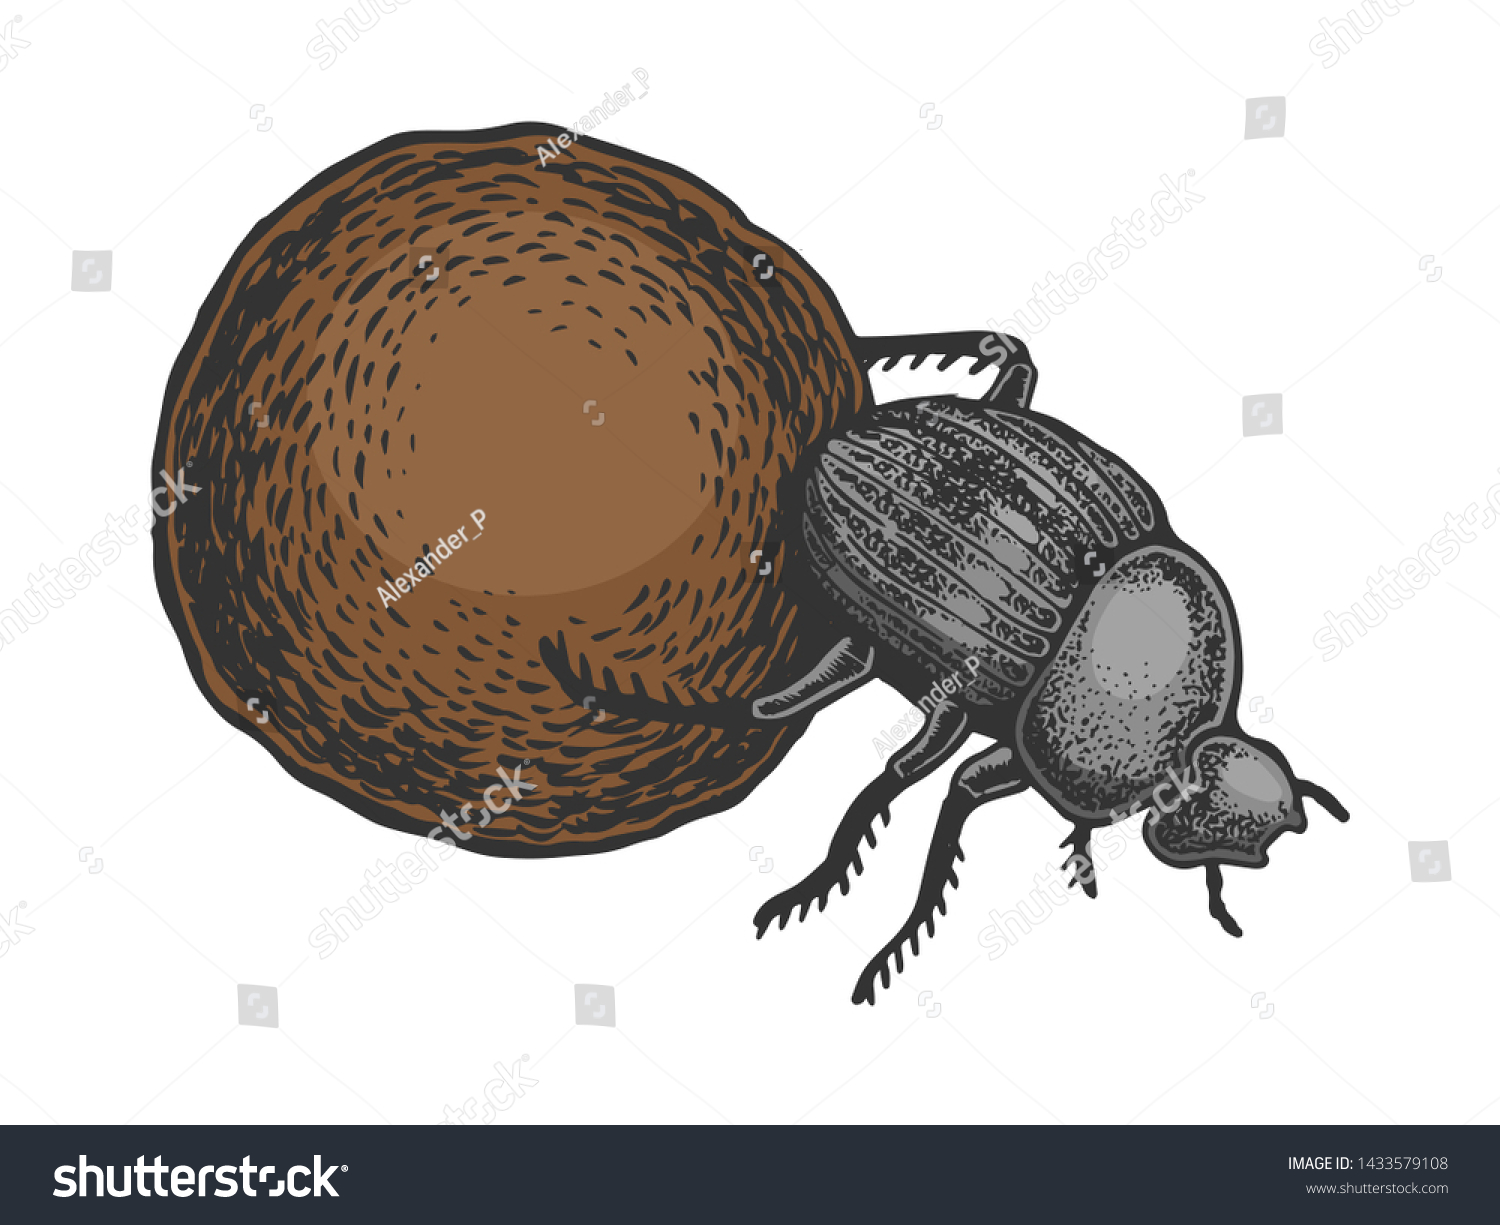 SVG of Dor beetle bug insect animal color sketch engraving vector illustration. Scratch board style imitation. Black and white hand drawn image. svg